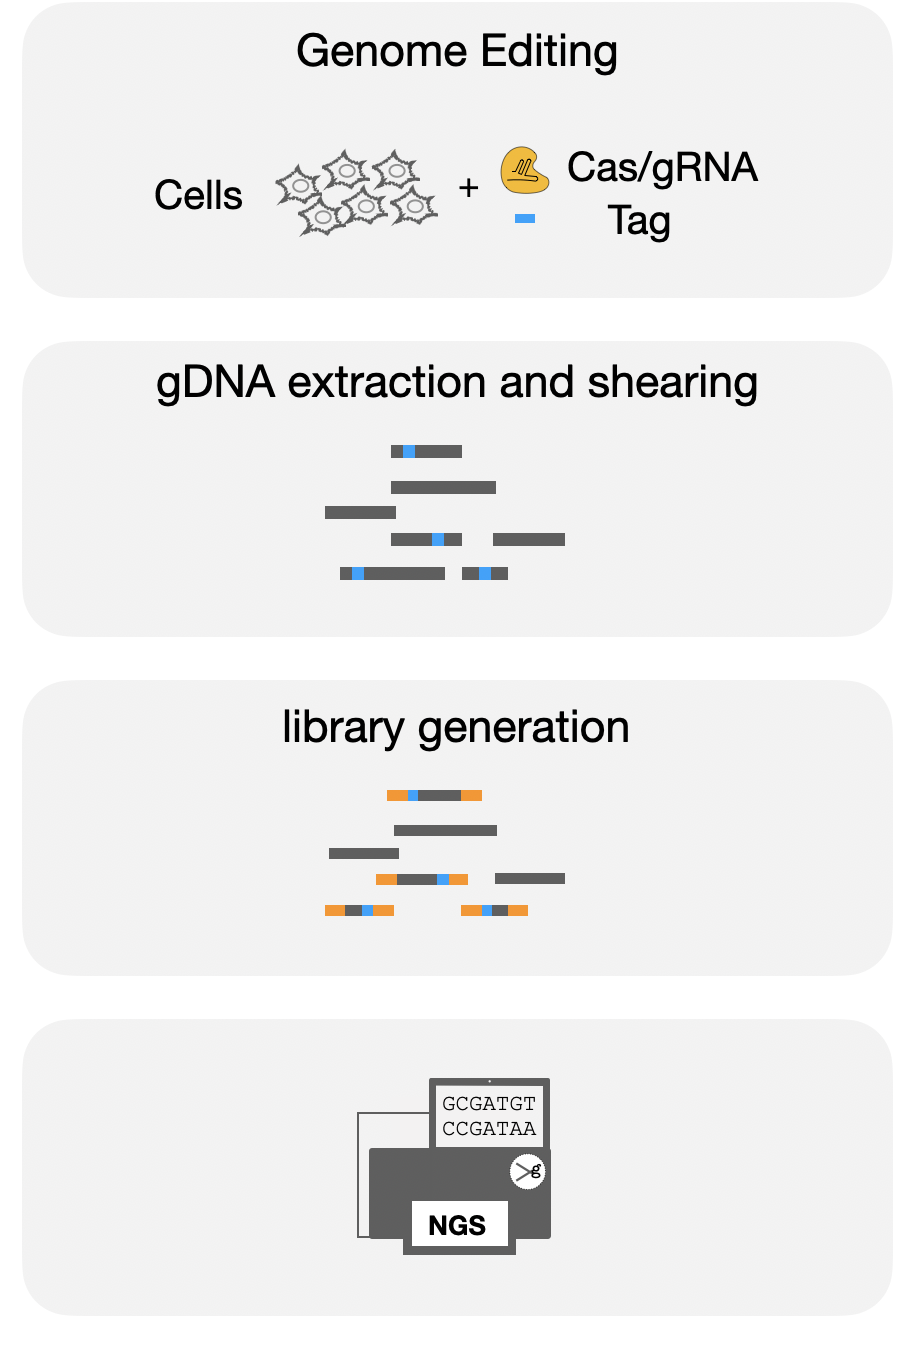 Enlarged view: The iGUIDE/GUIDE-seq workflow